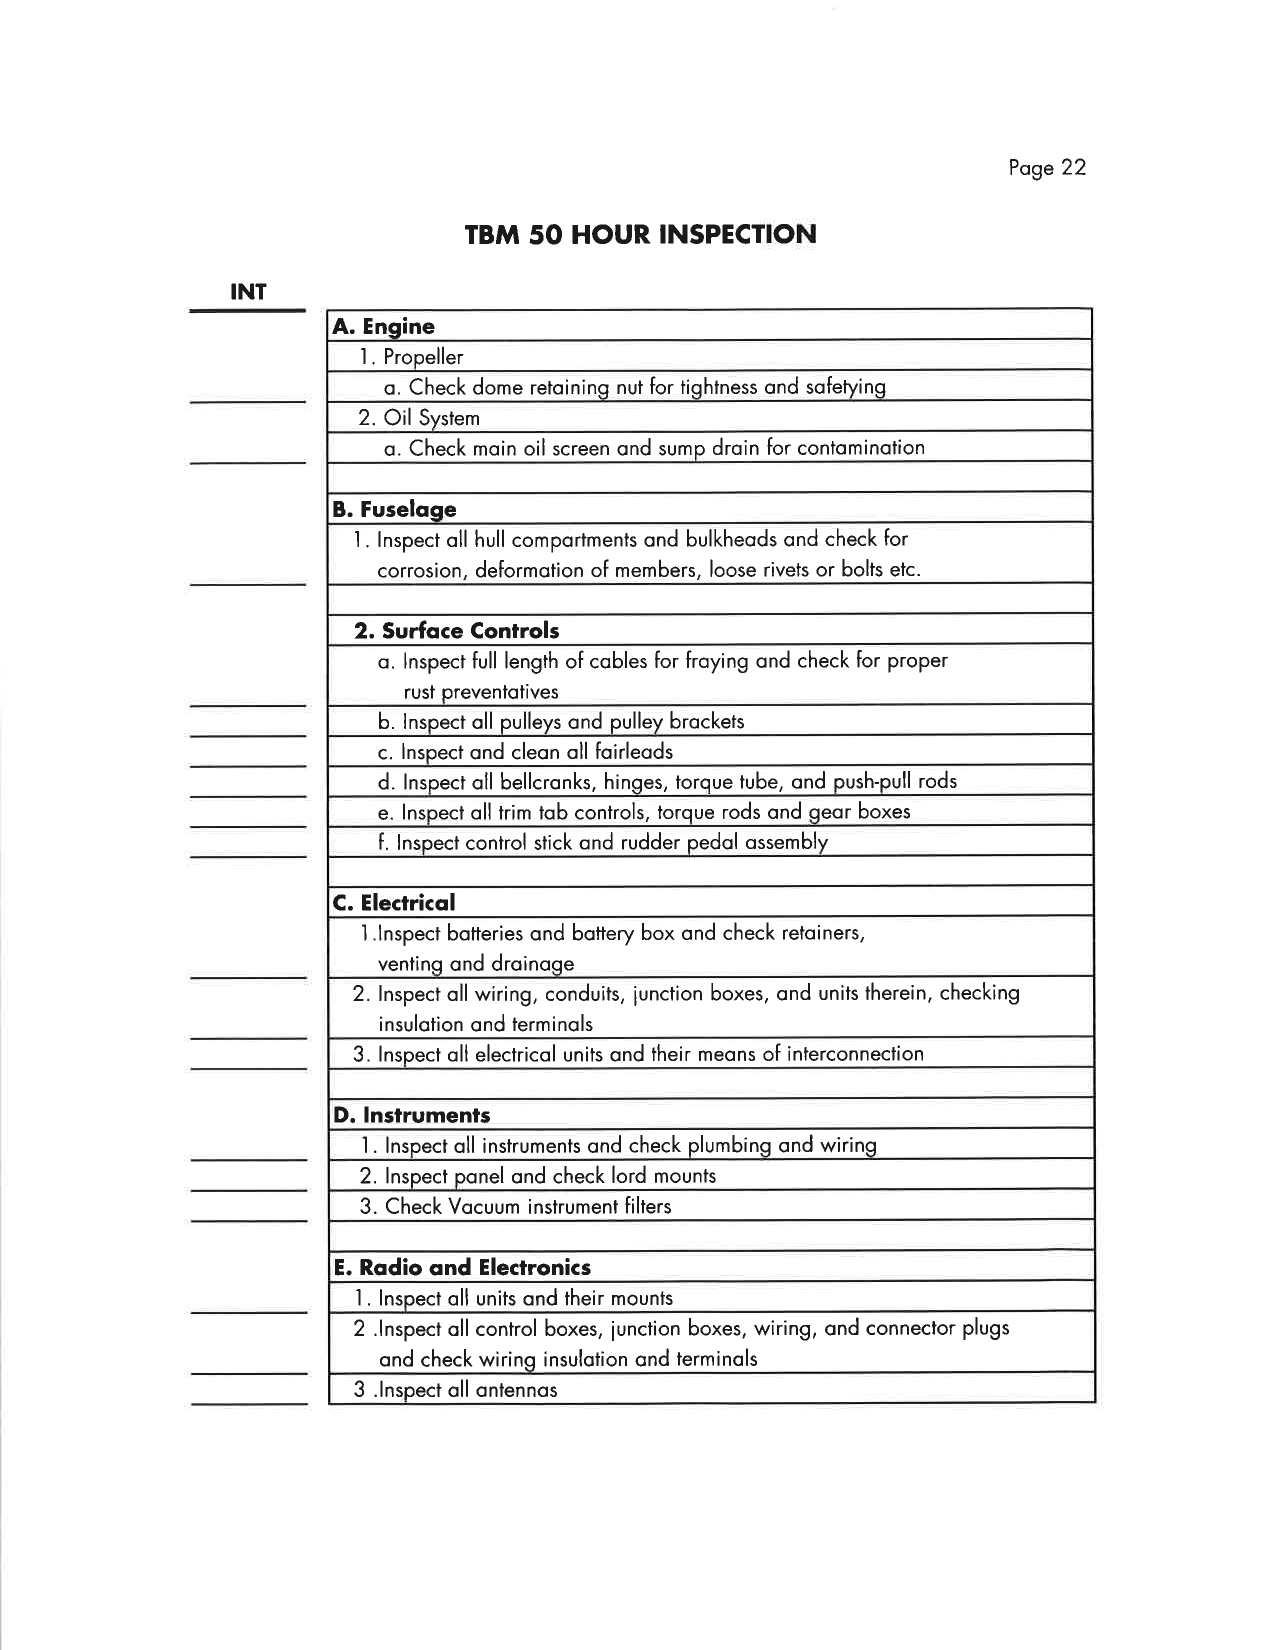 Sample page 4 from AirCorps Library document: TBM Checklist